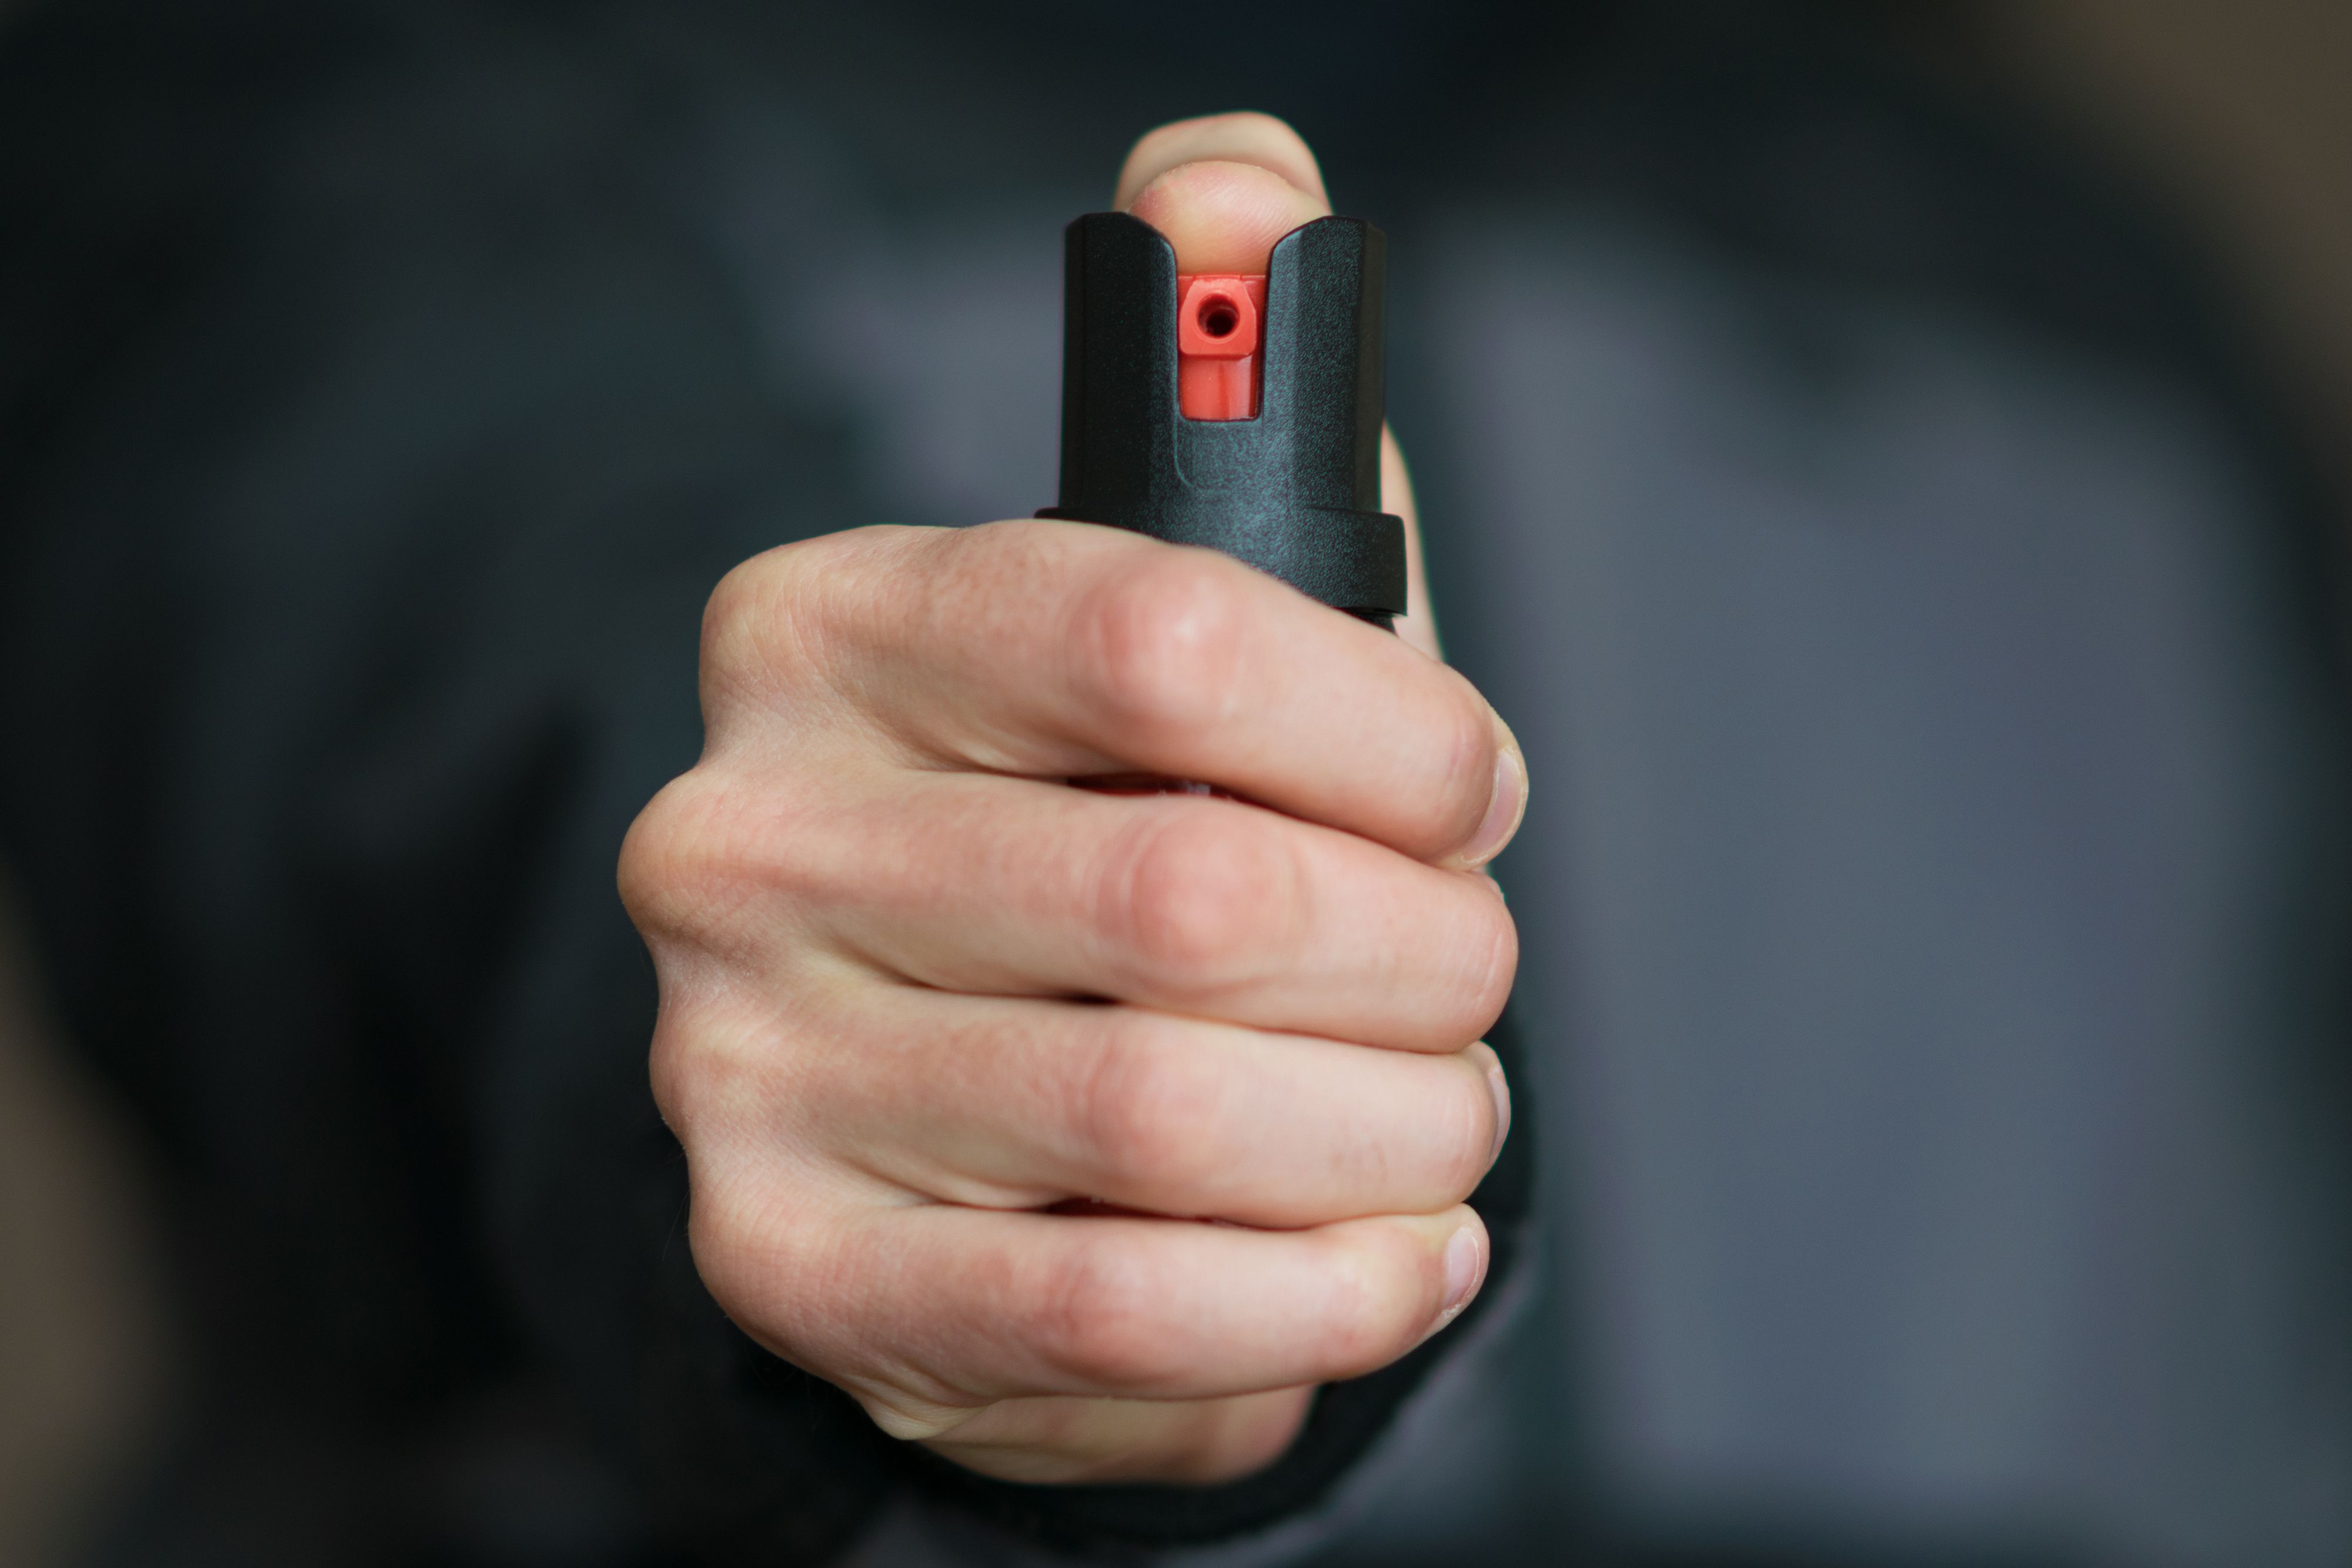 What to Use Instead of Pepper Spray